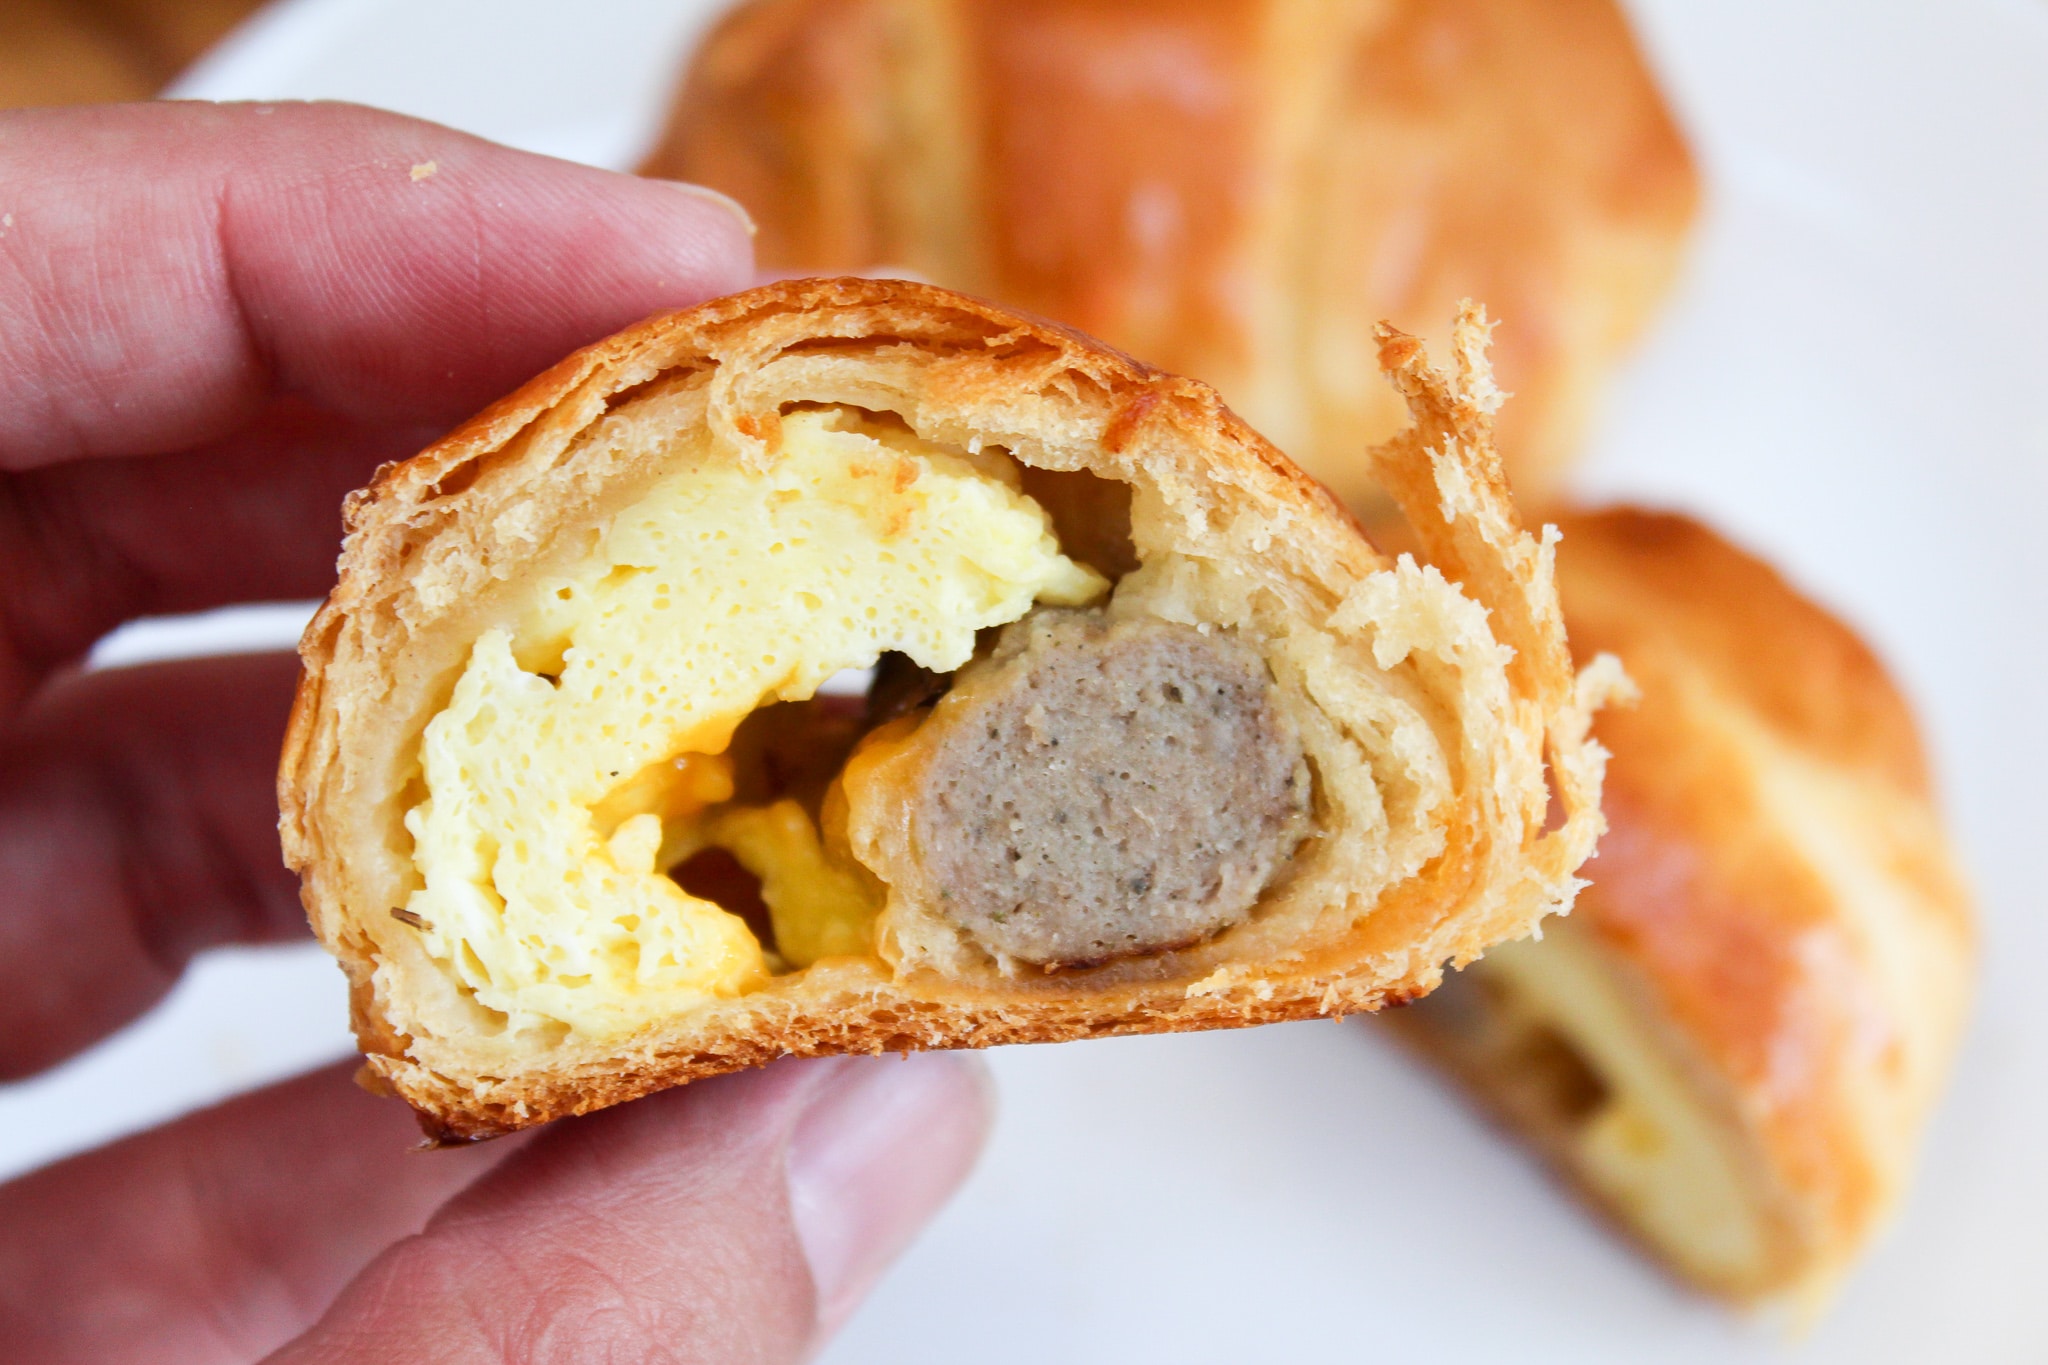 roll-up cut in half to see eggs and sausage and held in hand